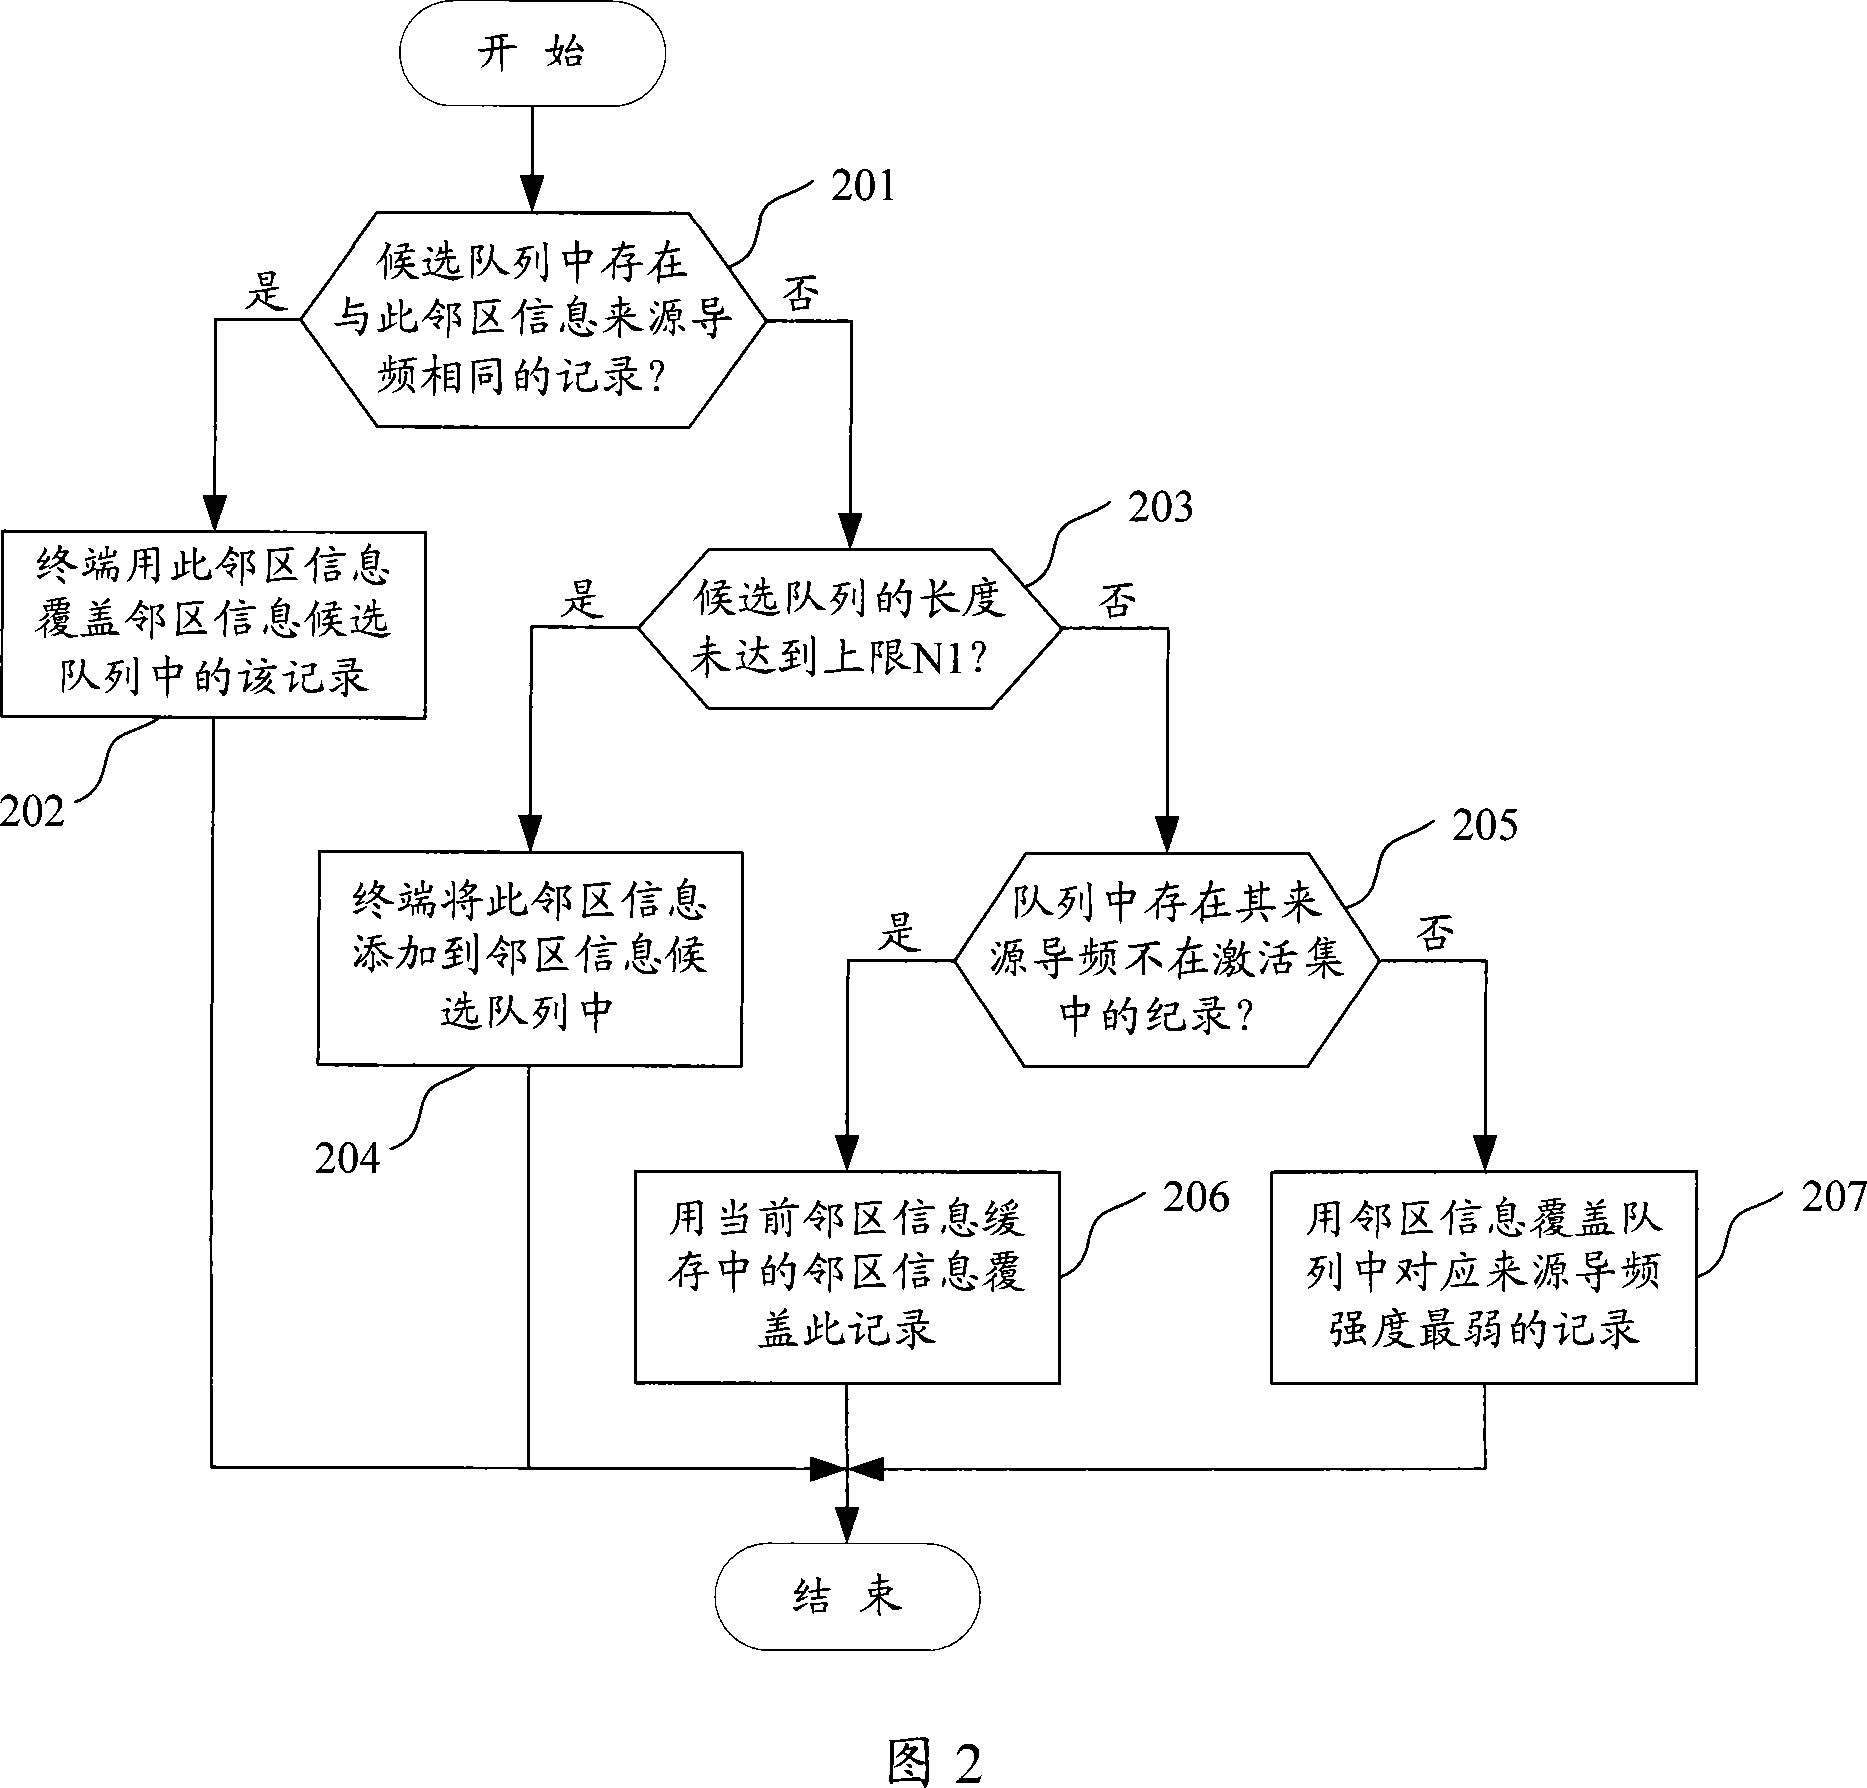 CDMA cluster communication system conventional group calling terminal side adjacent cell information maintenance method